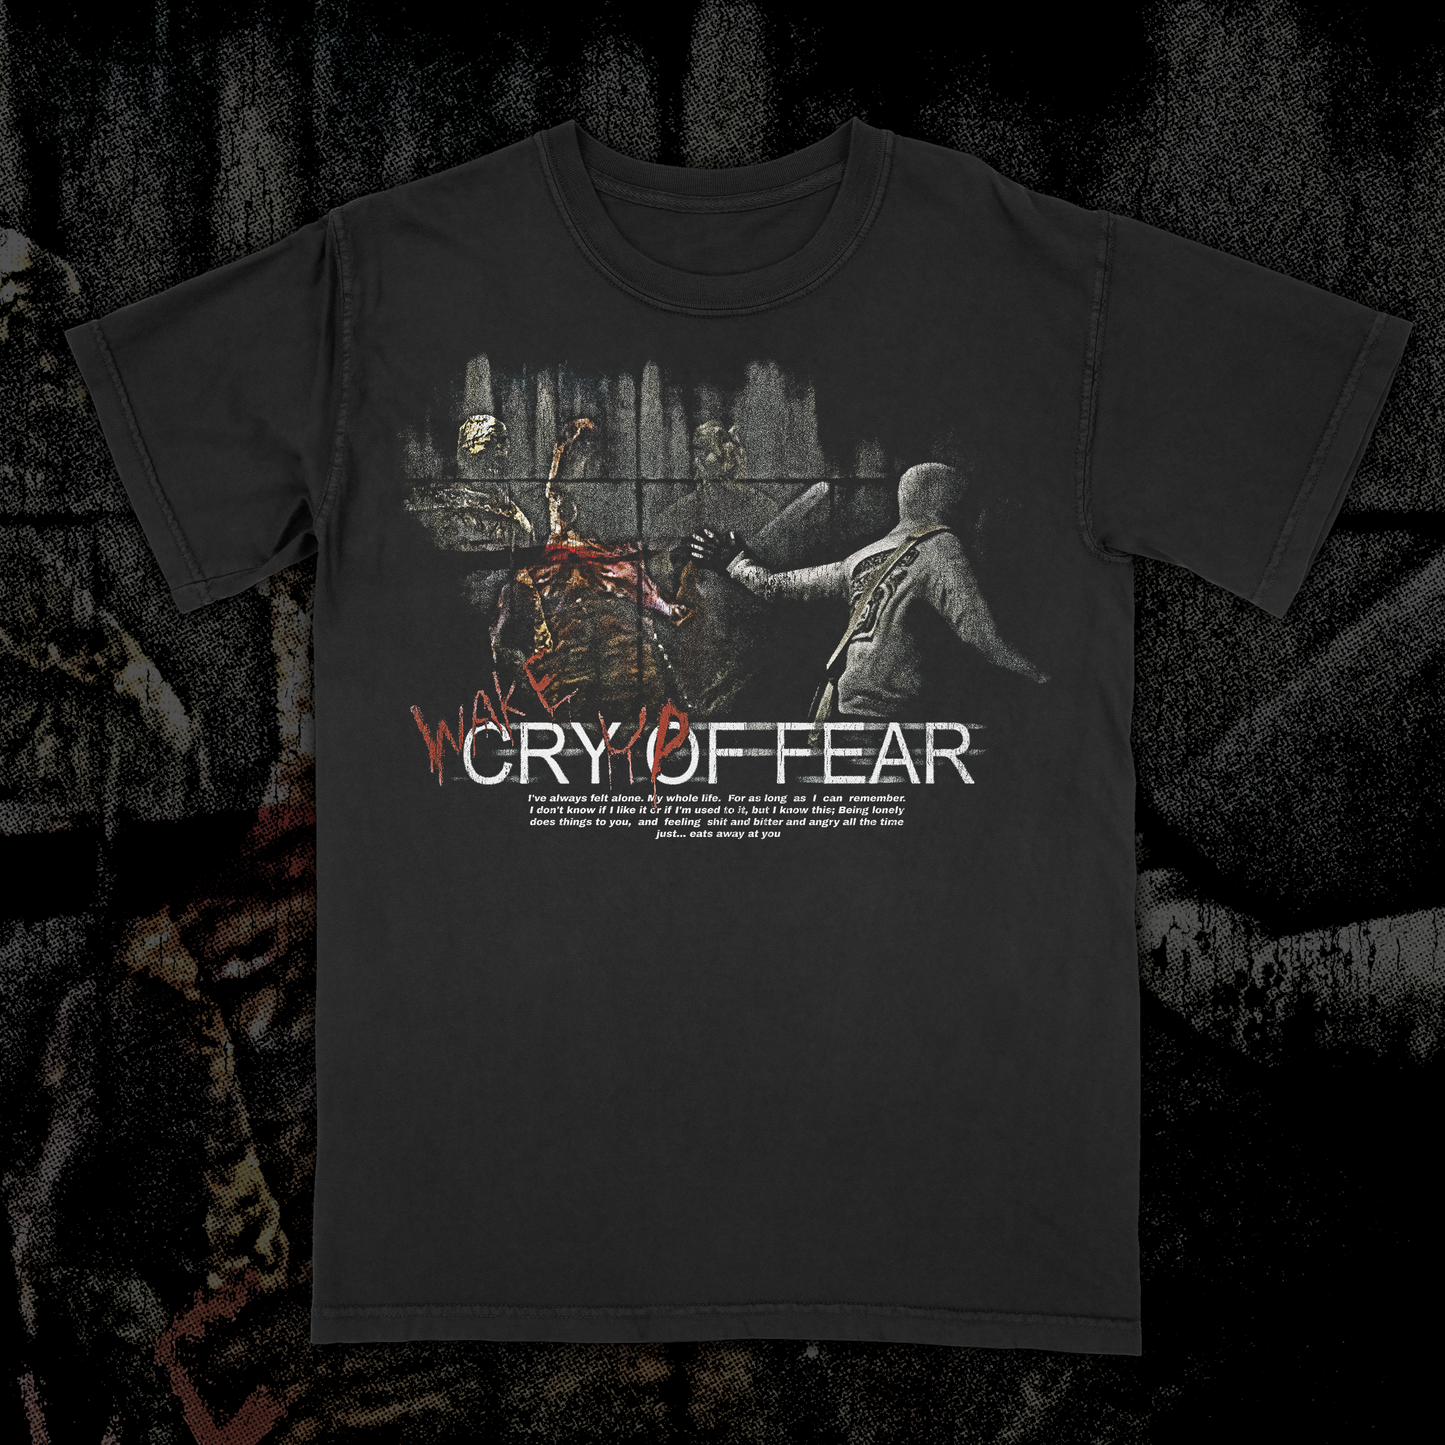 Cry of Fear - Loneliness (2 options)